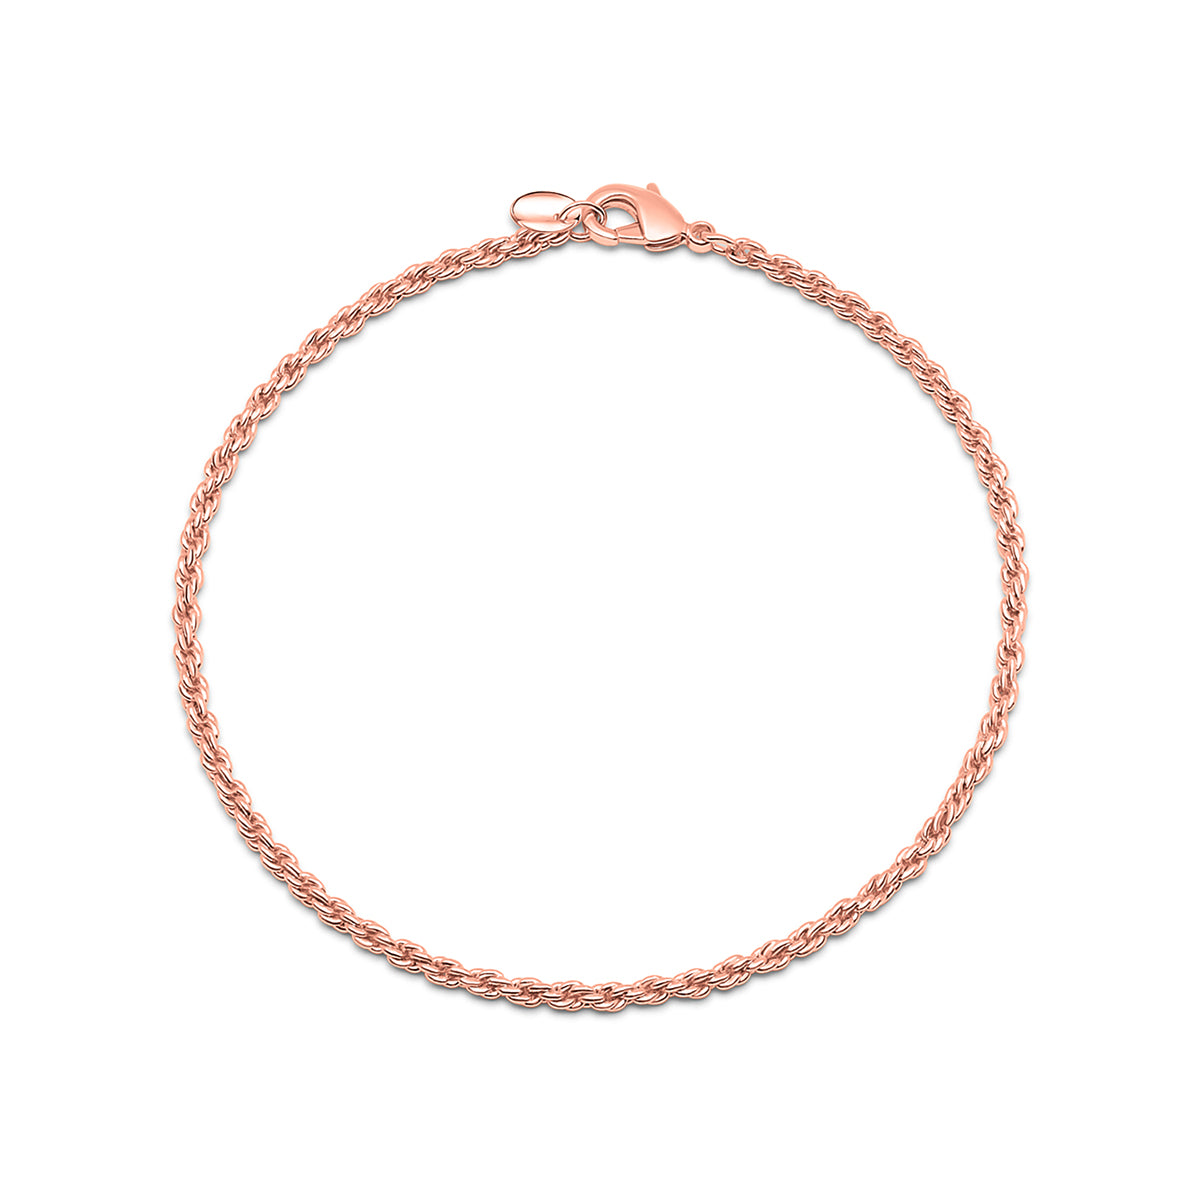 Rose gold plated rope chain bracelet